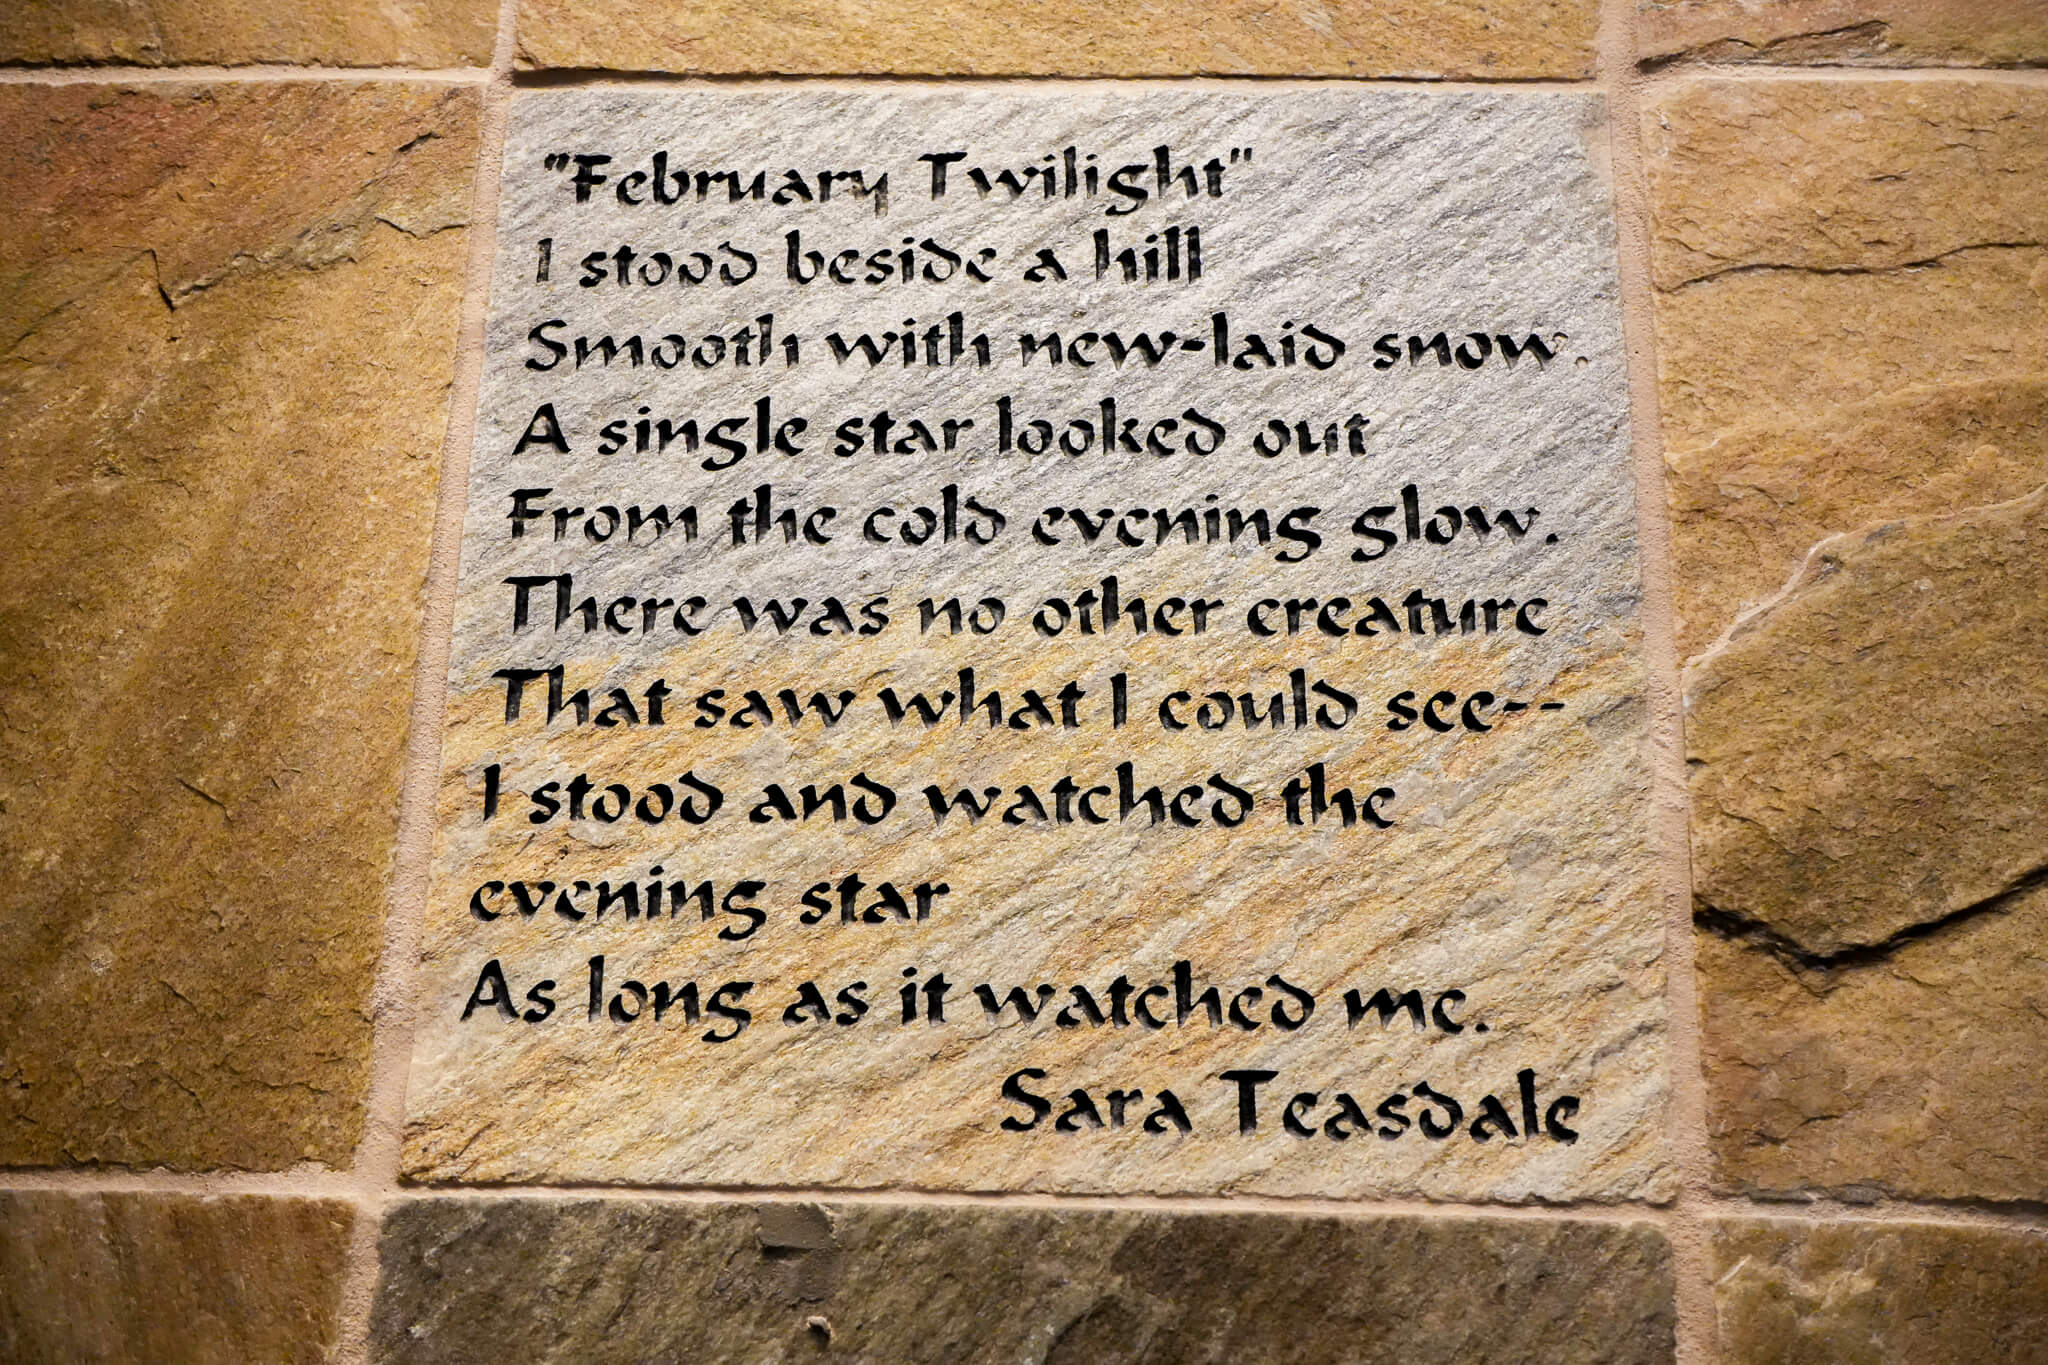 Thoughts on “February Twilight”